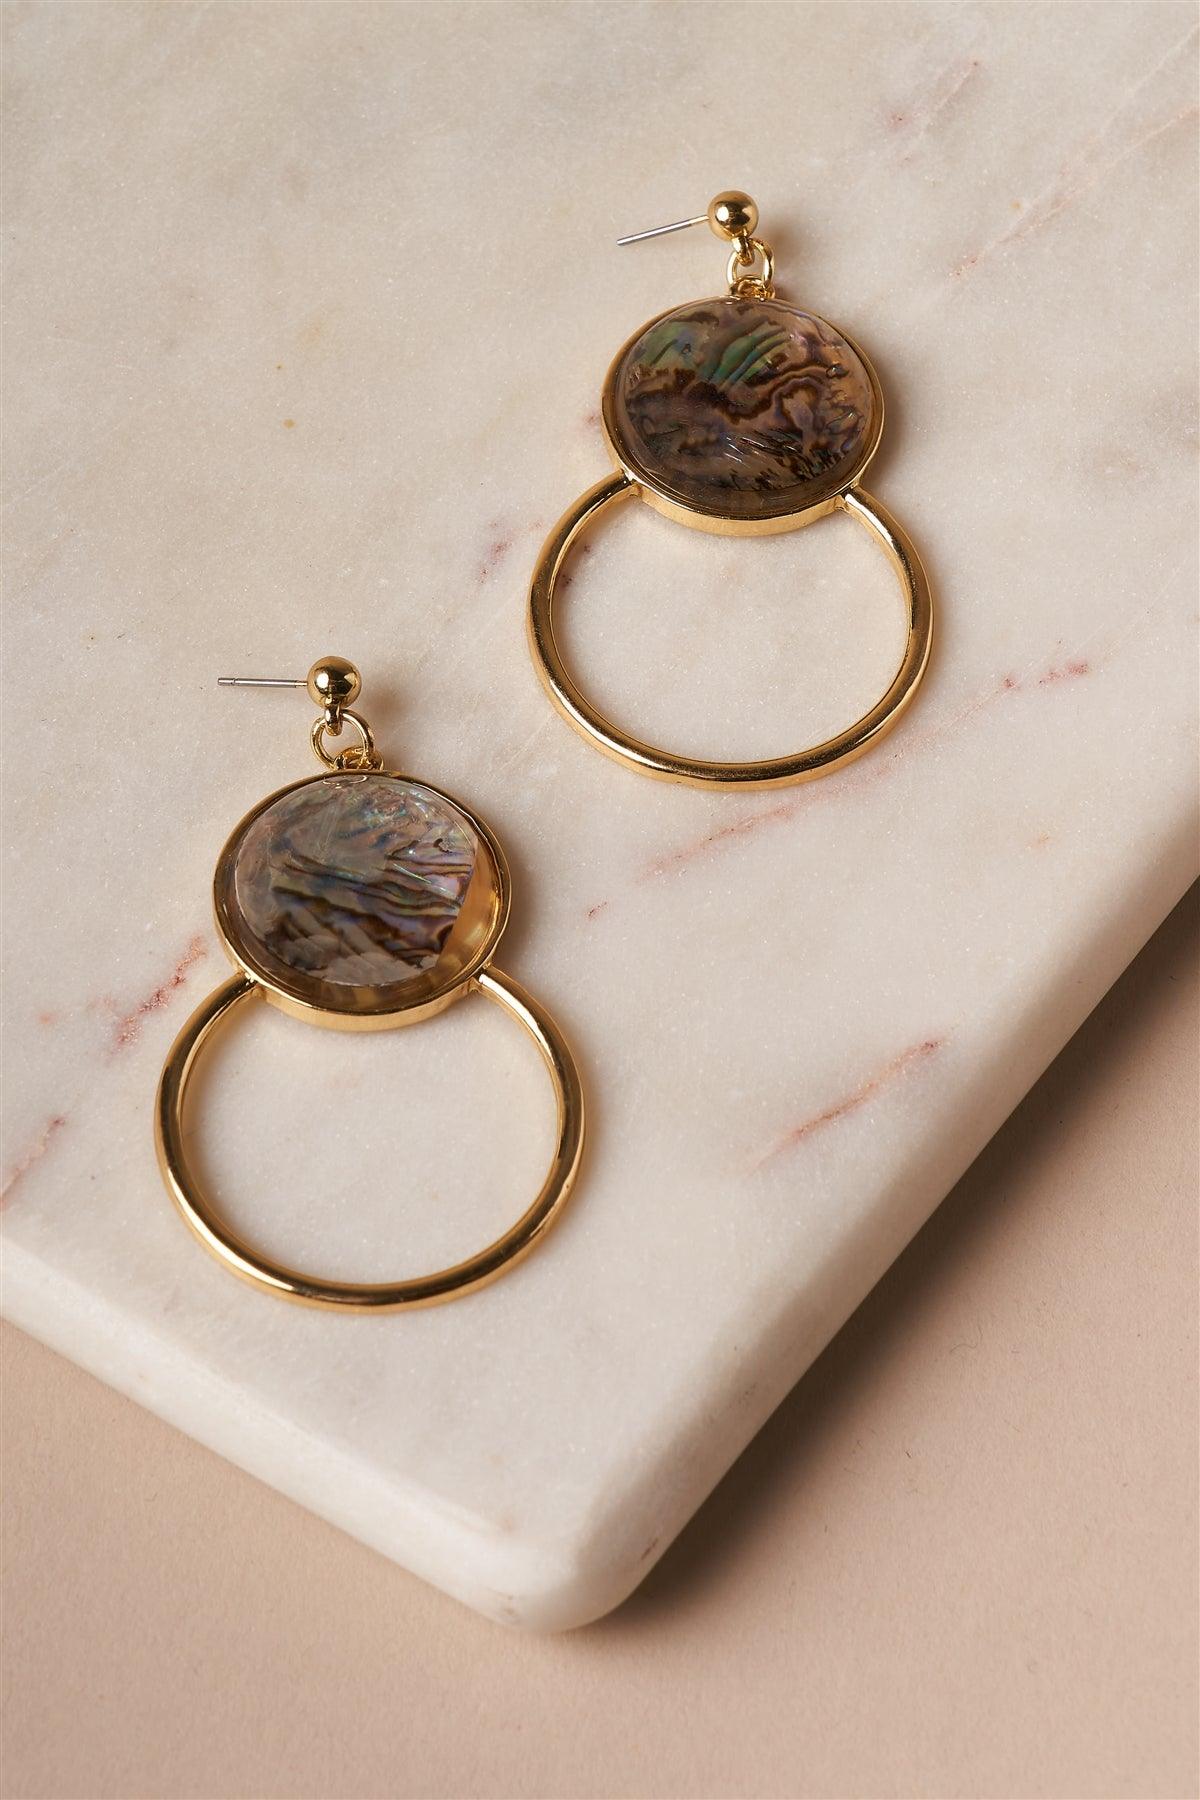 Iridescently Marbled Opal And Gold Dangle Earrings /1 Pair